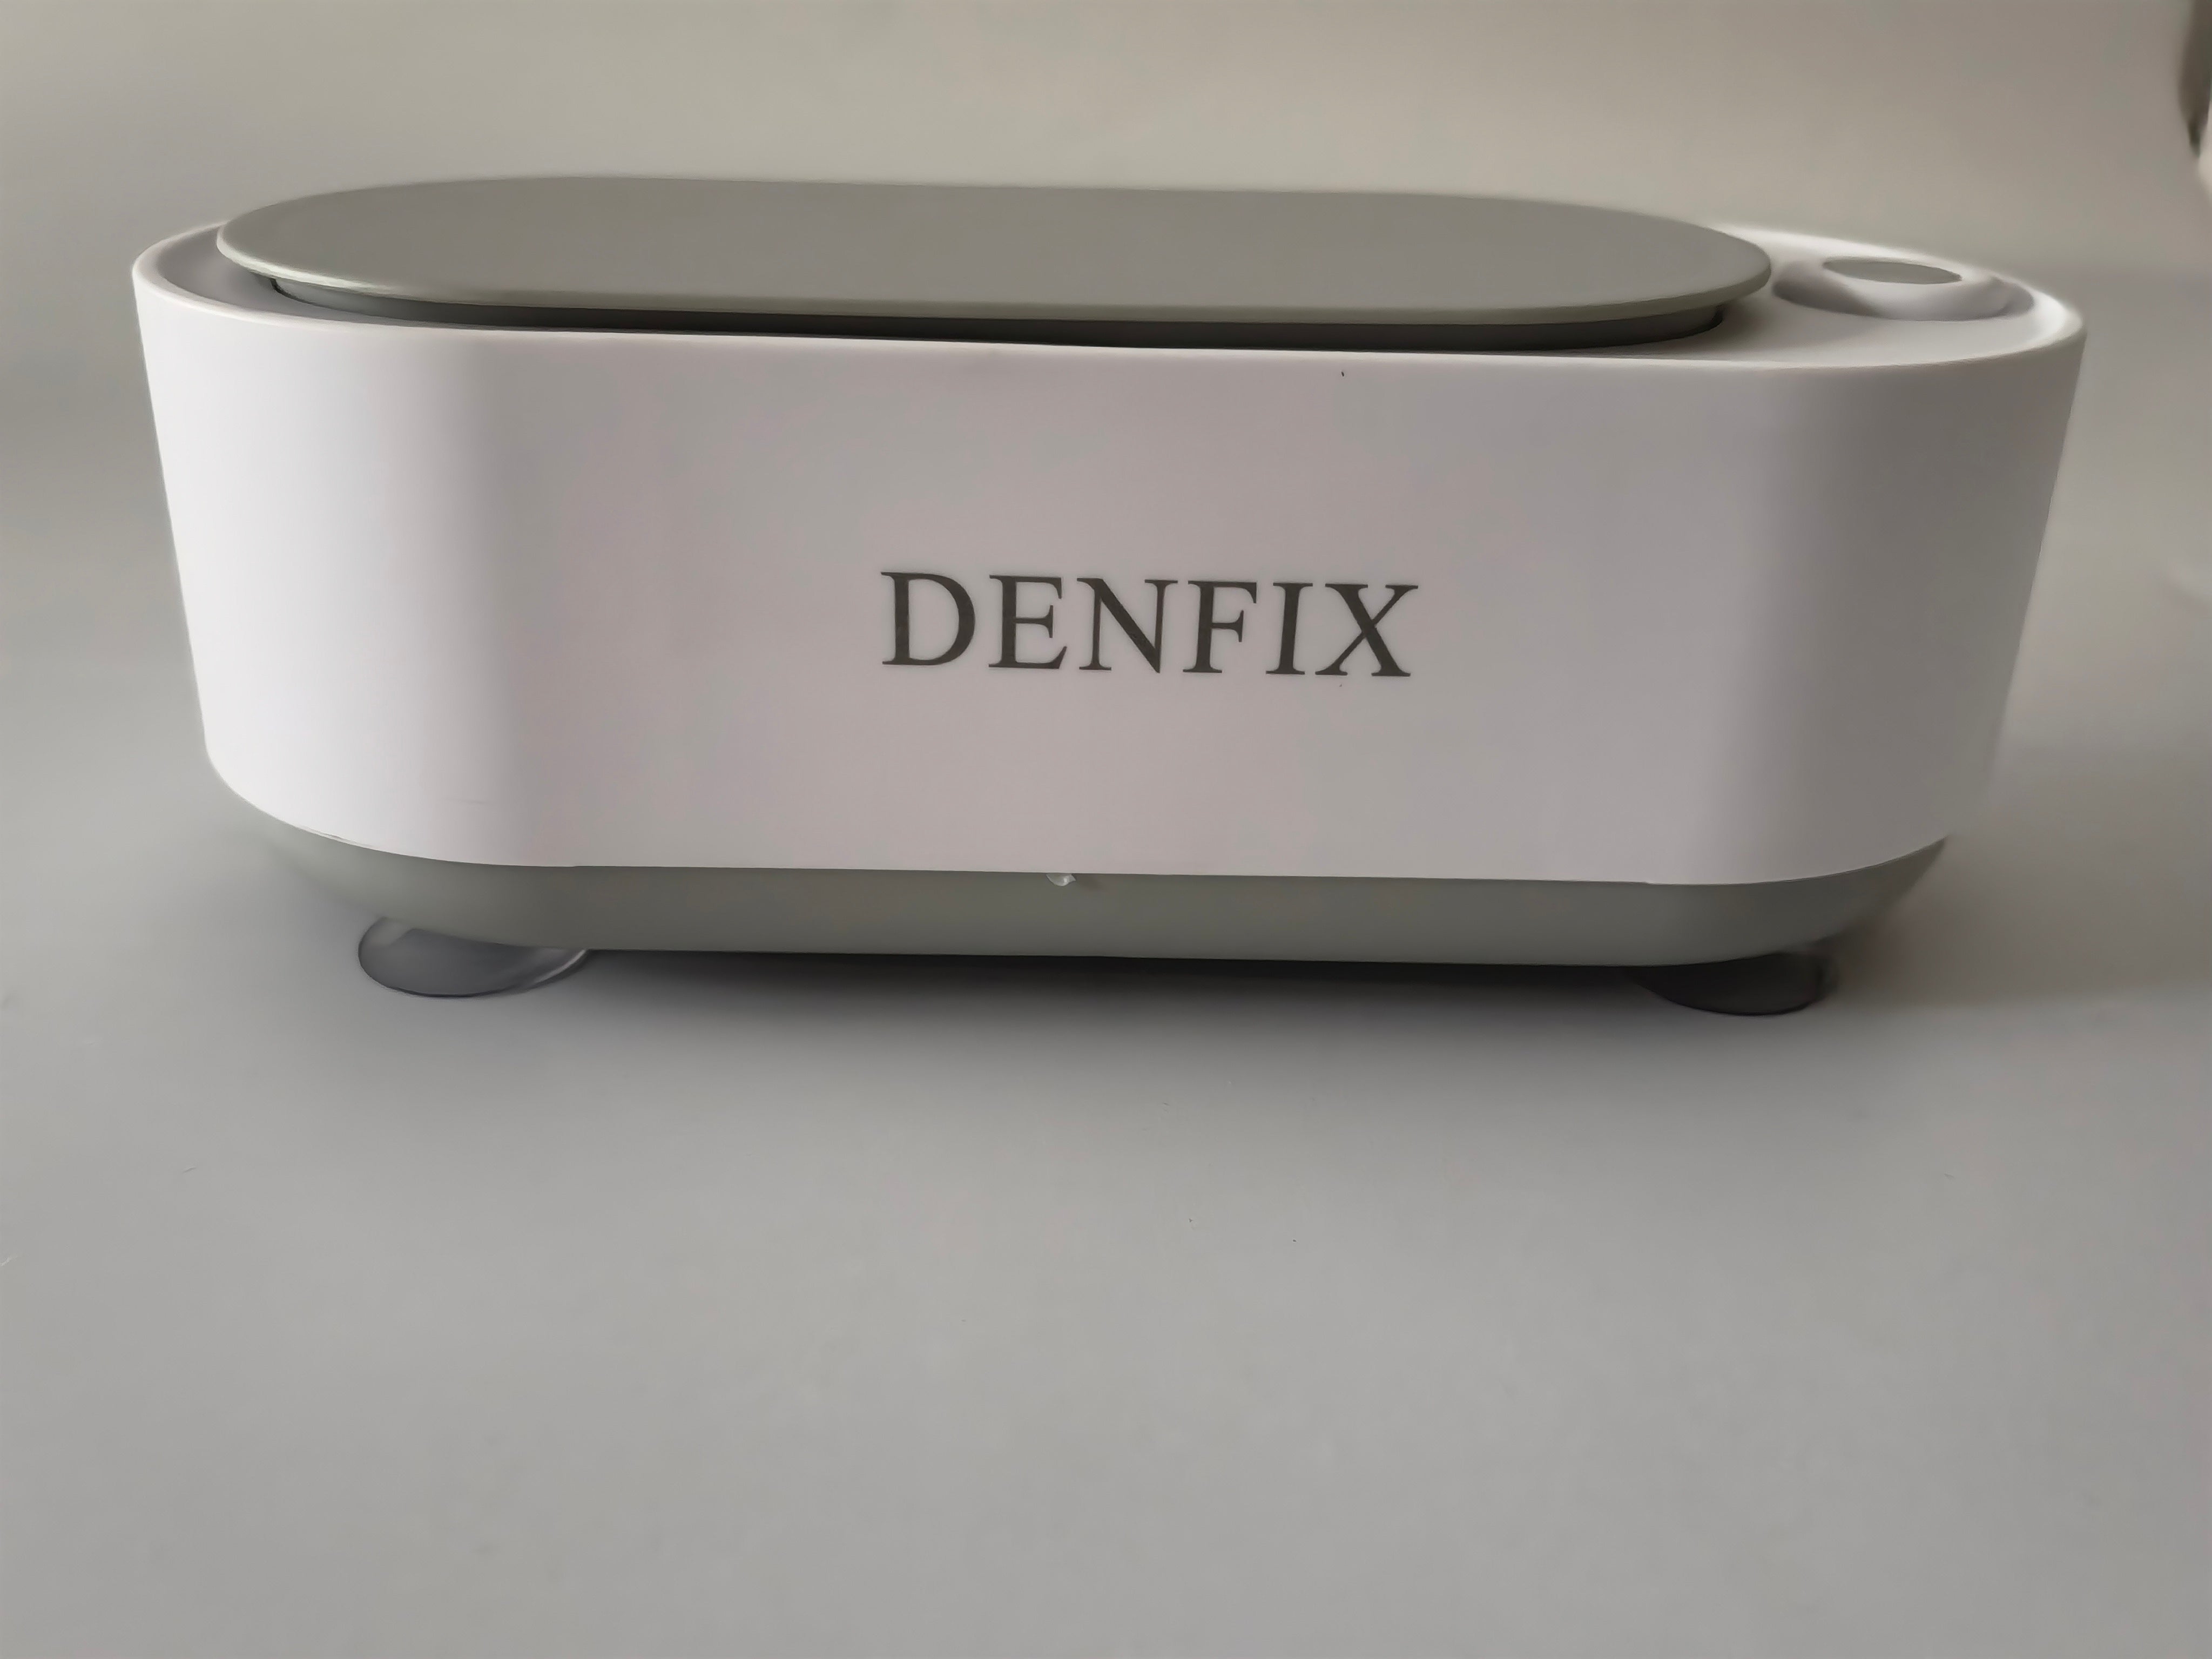 DENFIX Ultrasonic Jewelry Cleaning Machine, Portable Professional Household Ultrasonic Jewelry Cleaner for All Jewelry Eyeglasses Watches Shaver